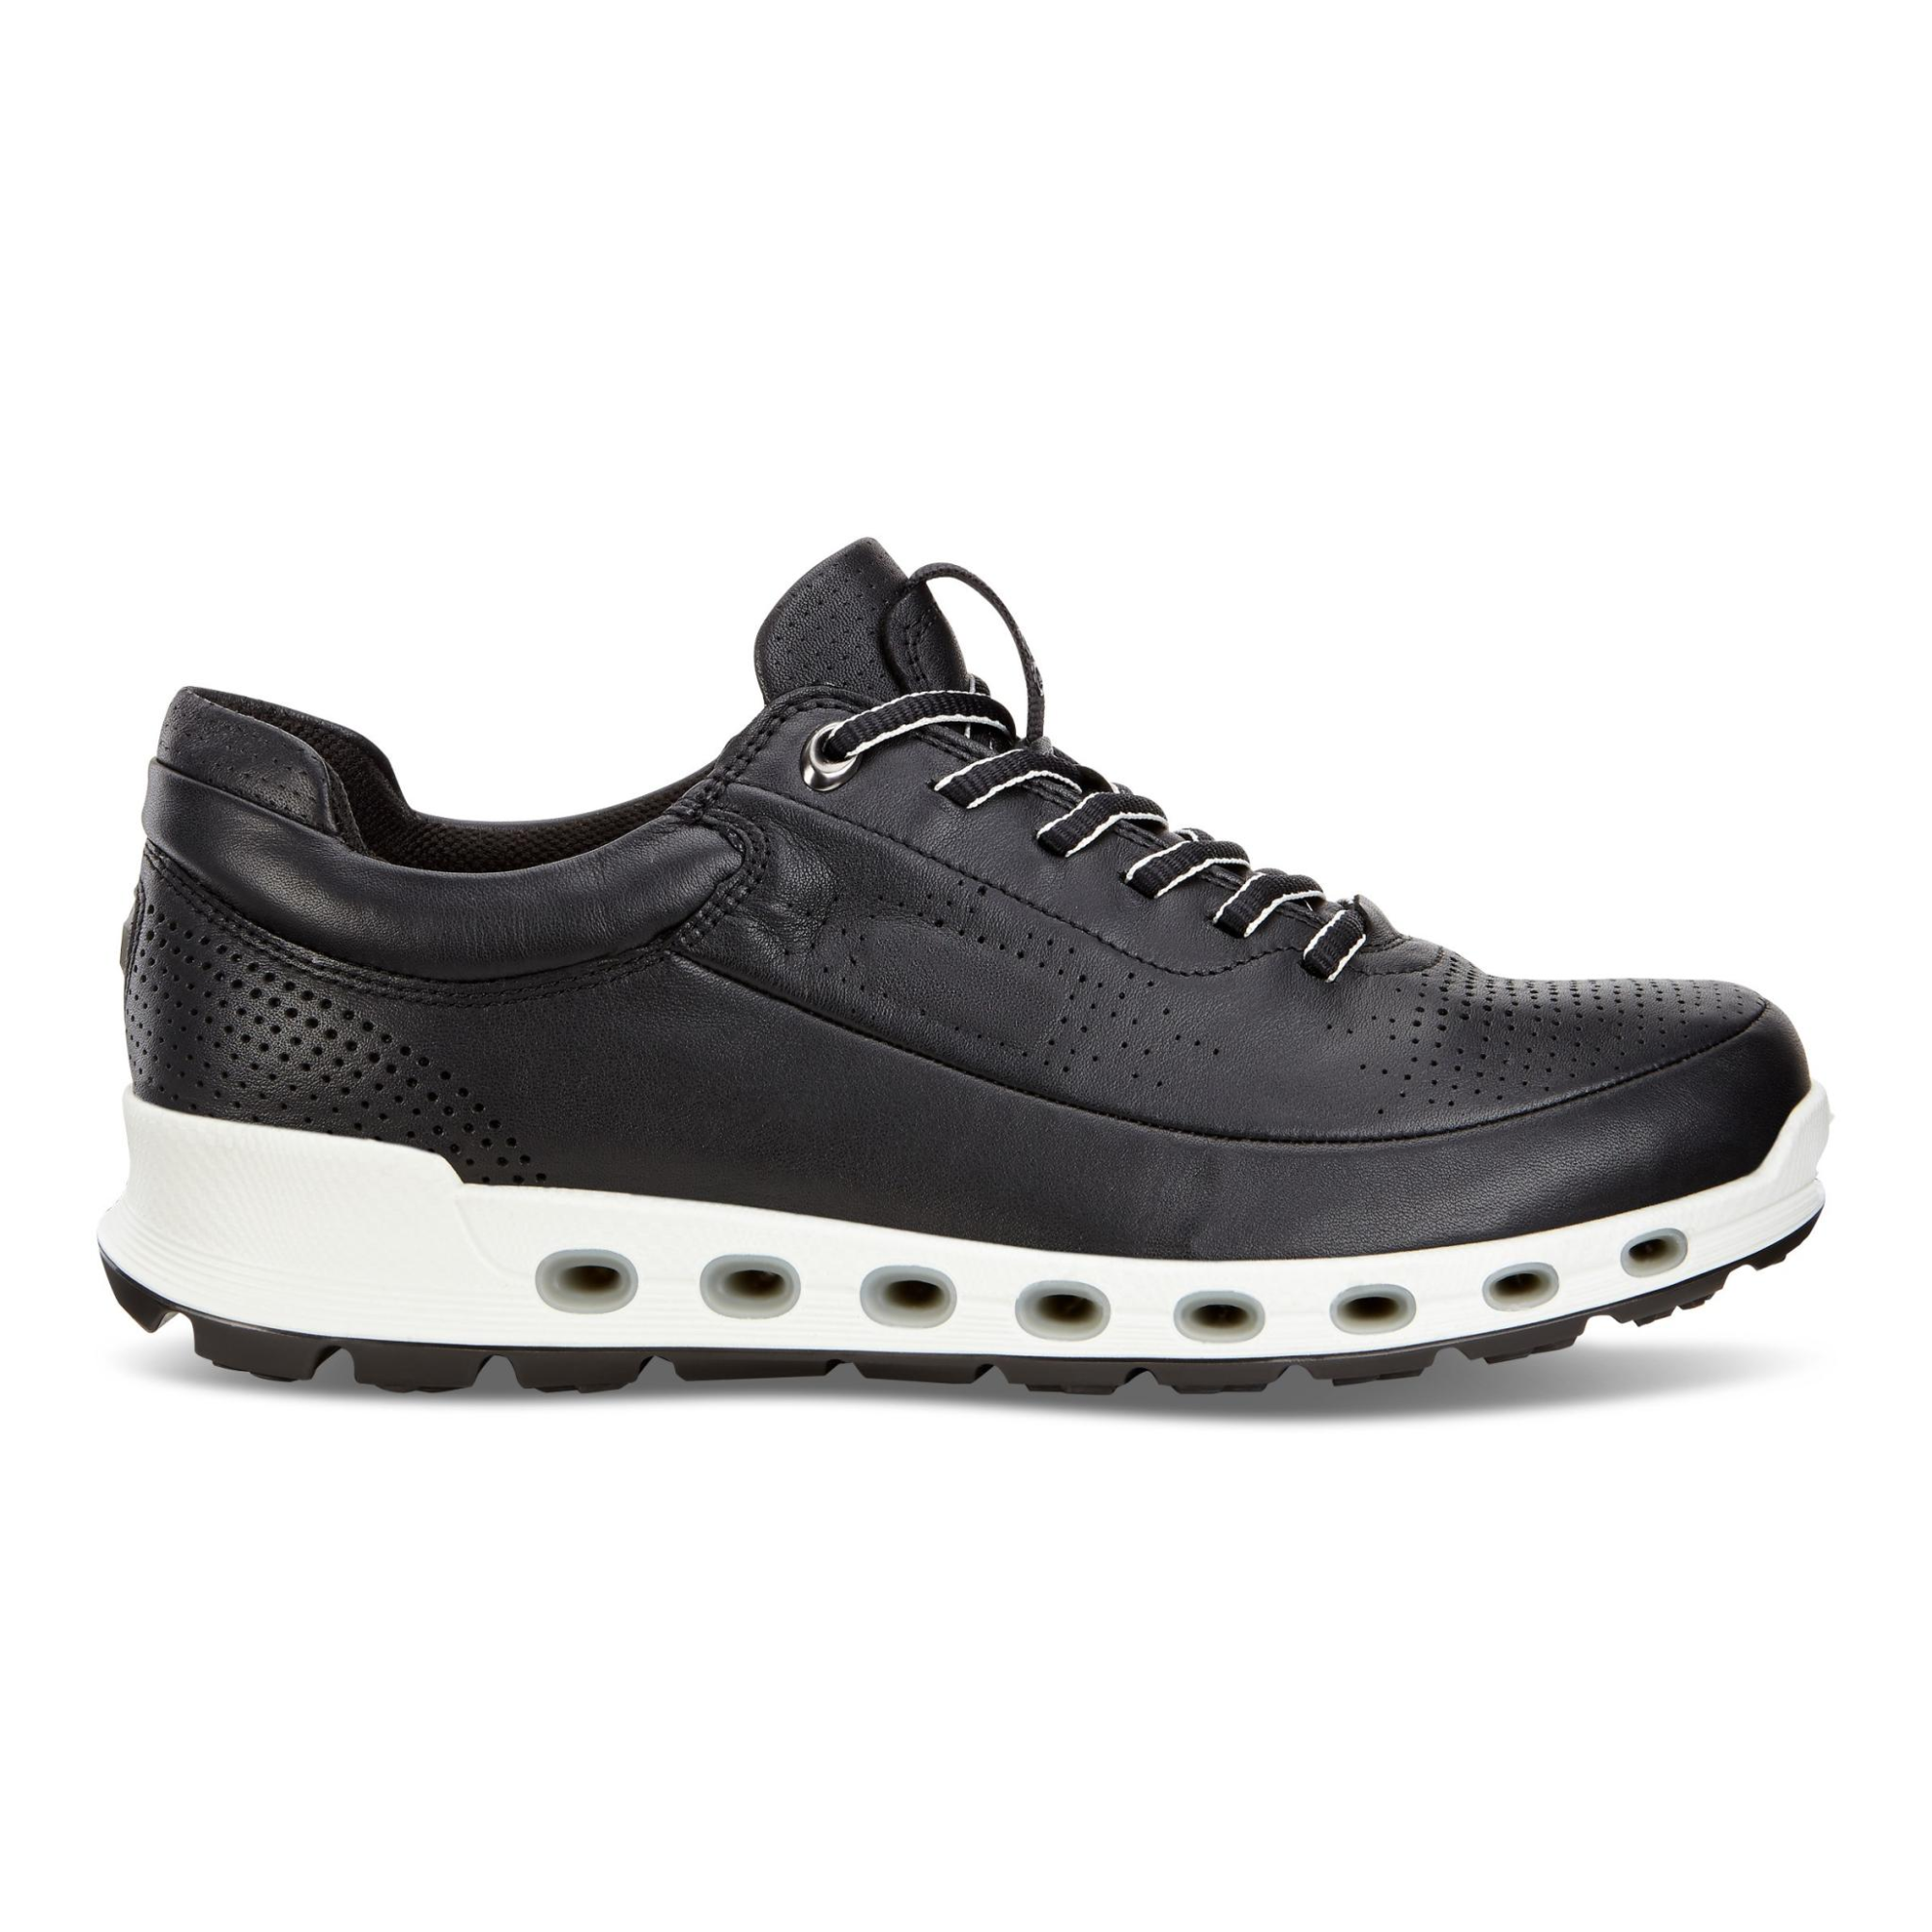 Ecco Mens Cool 2.0 Leather GTX 40 - Products Veryk Mall - Veryk Mall, many product, quick safe your money!